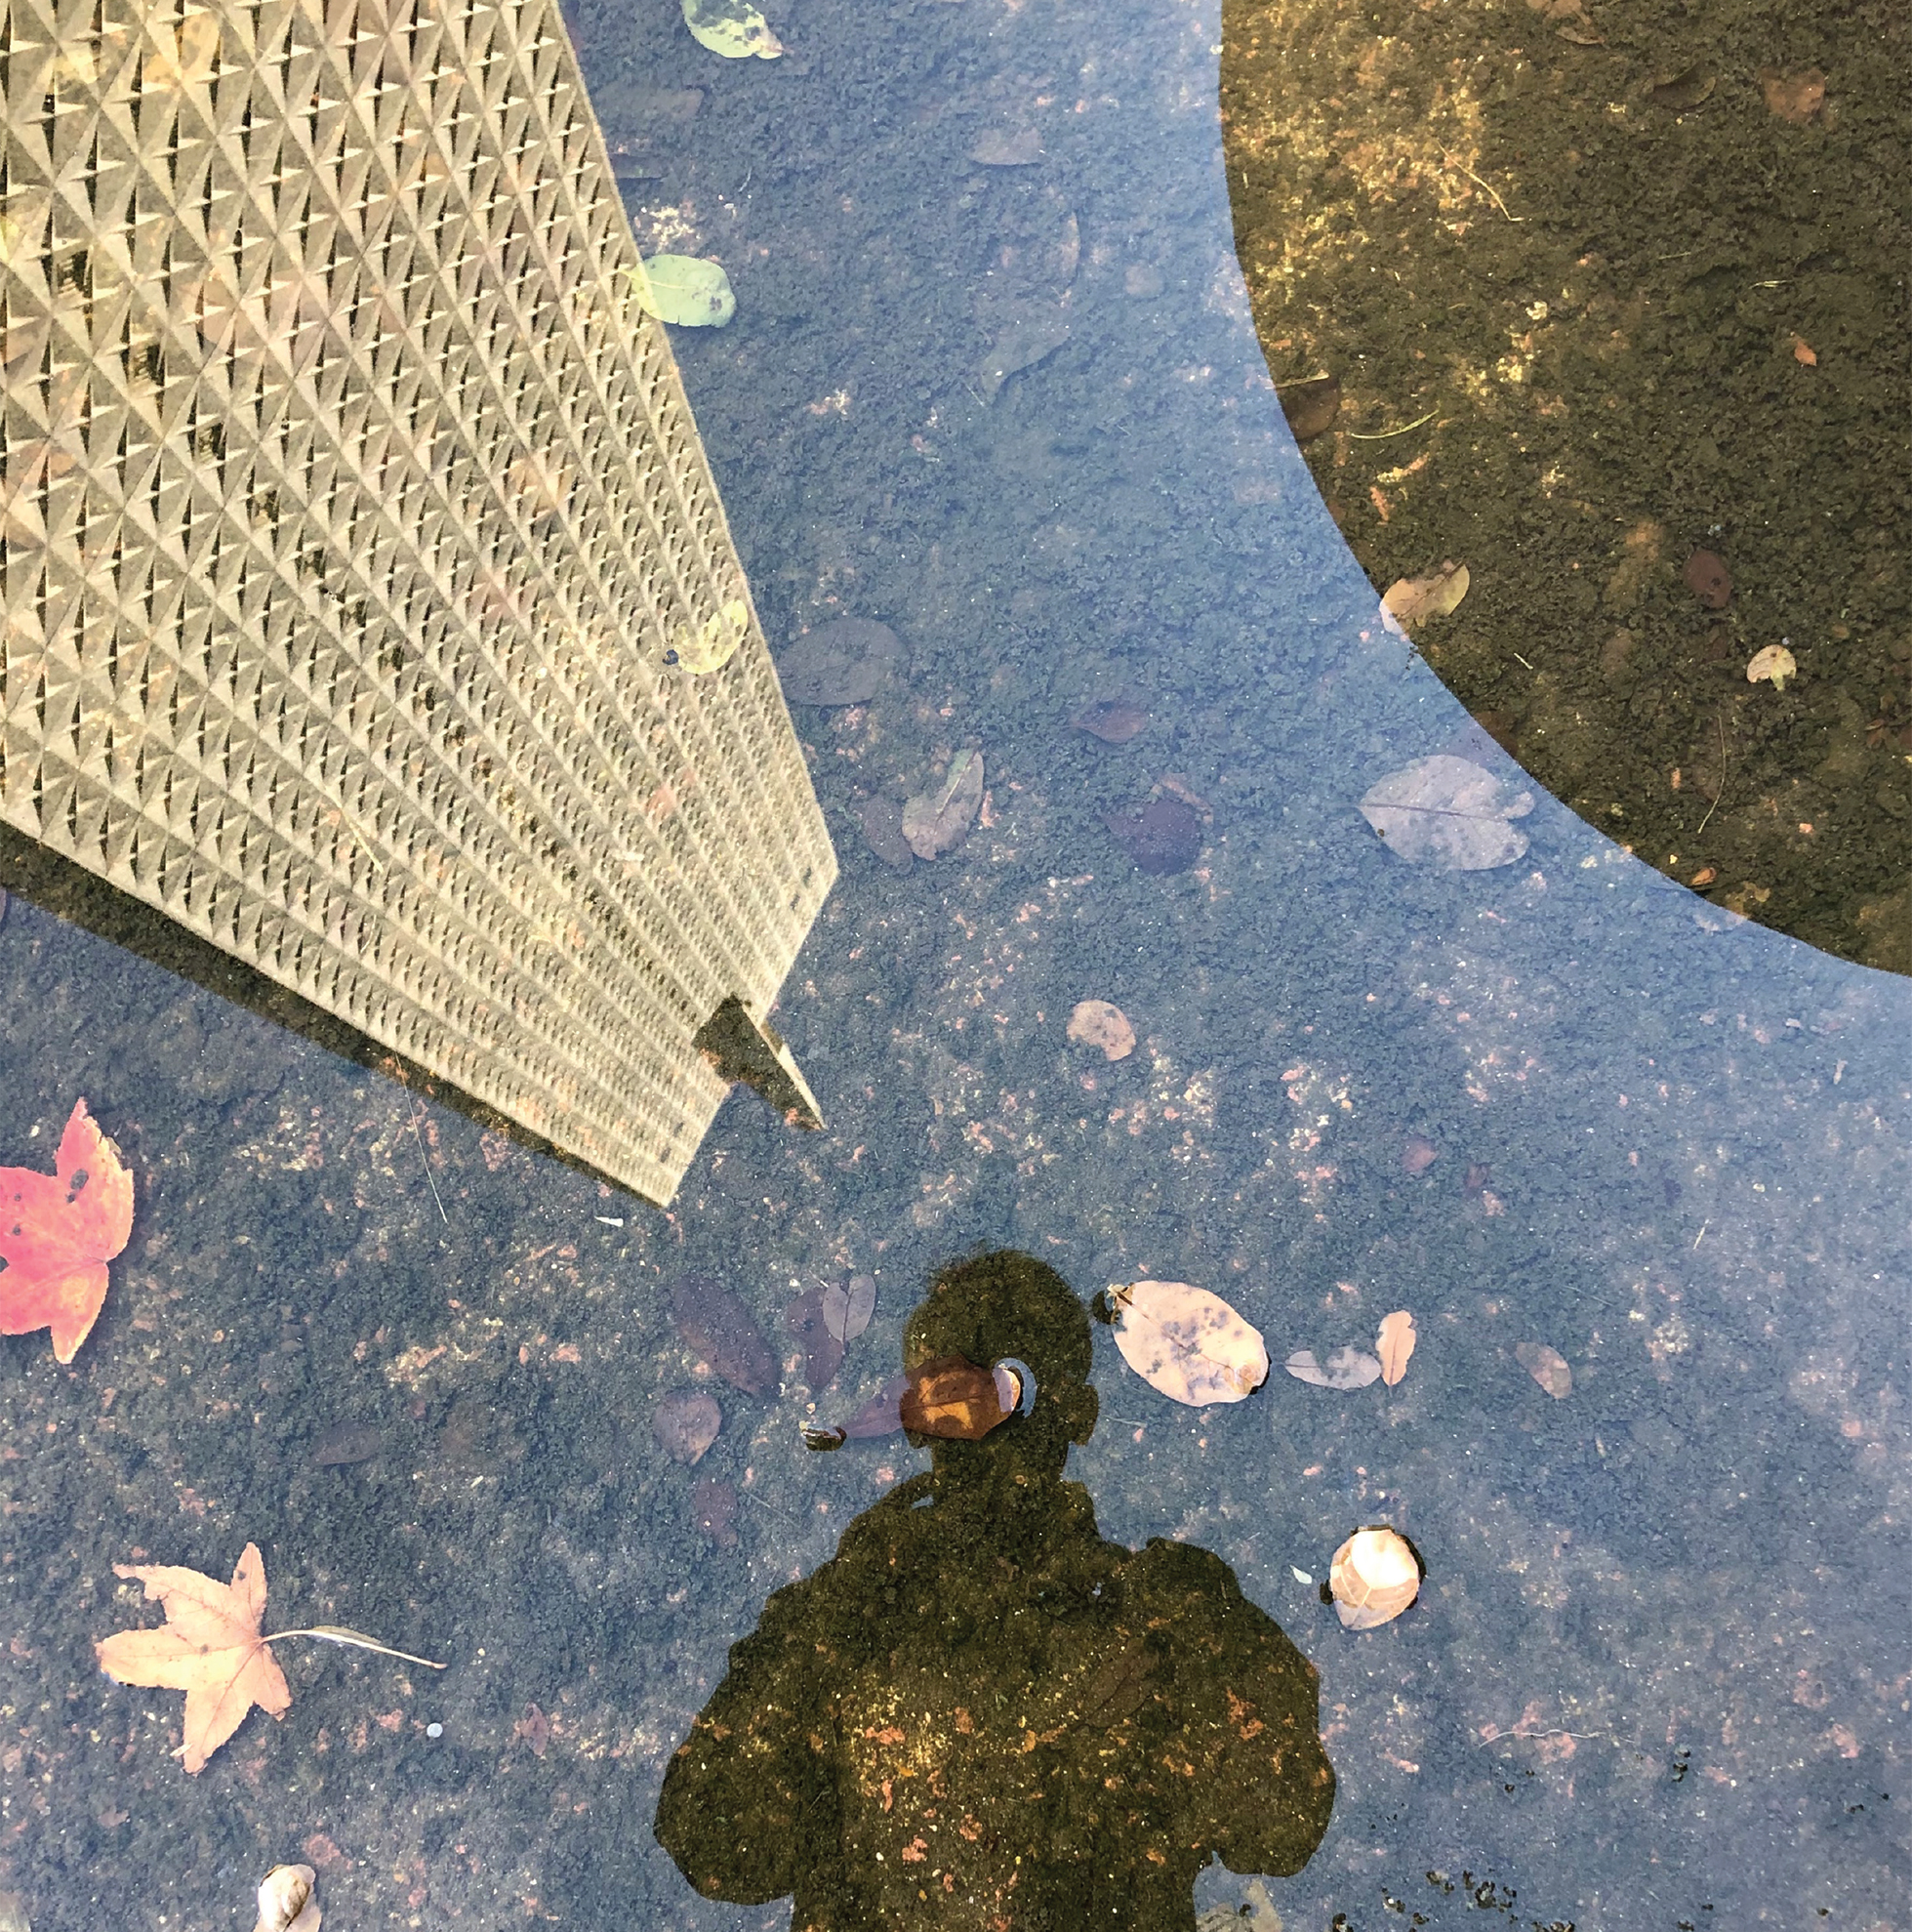 Zac Crain's reflection in a puddle in downtown Dallas.